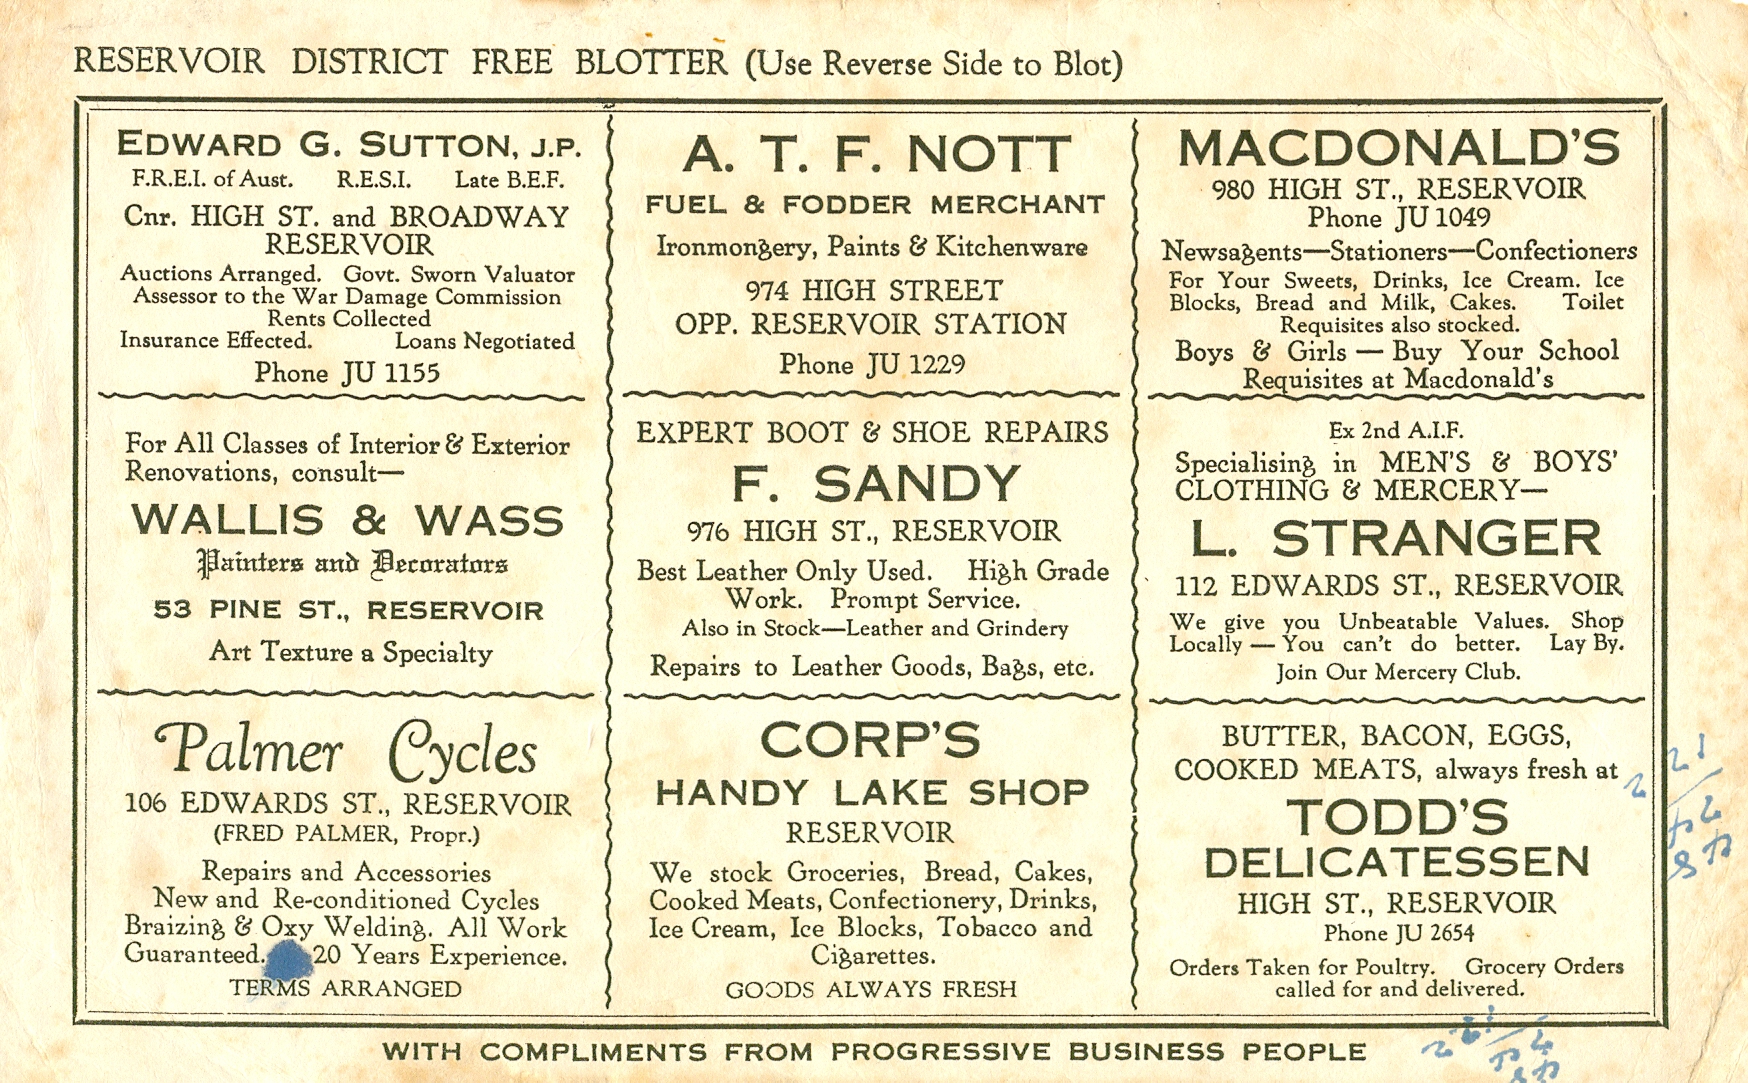 'Reservoir District free blotter', blotter, 1943-9, 14 x 22.5 cm. Collection of Andrew H.